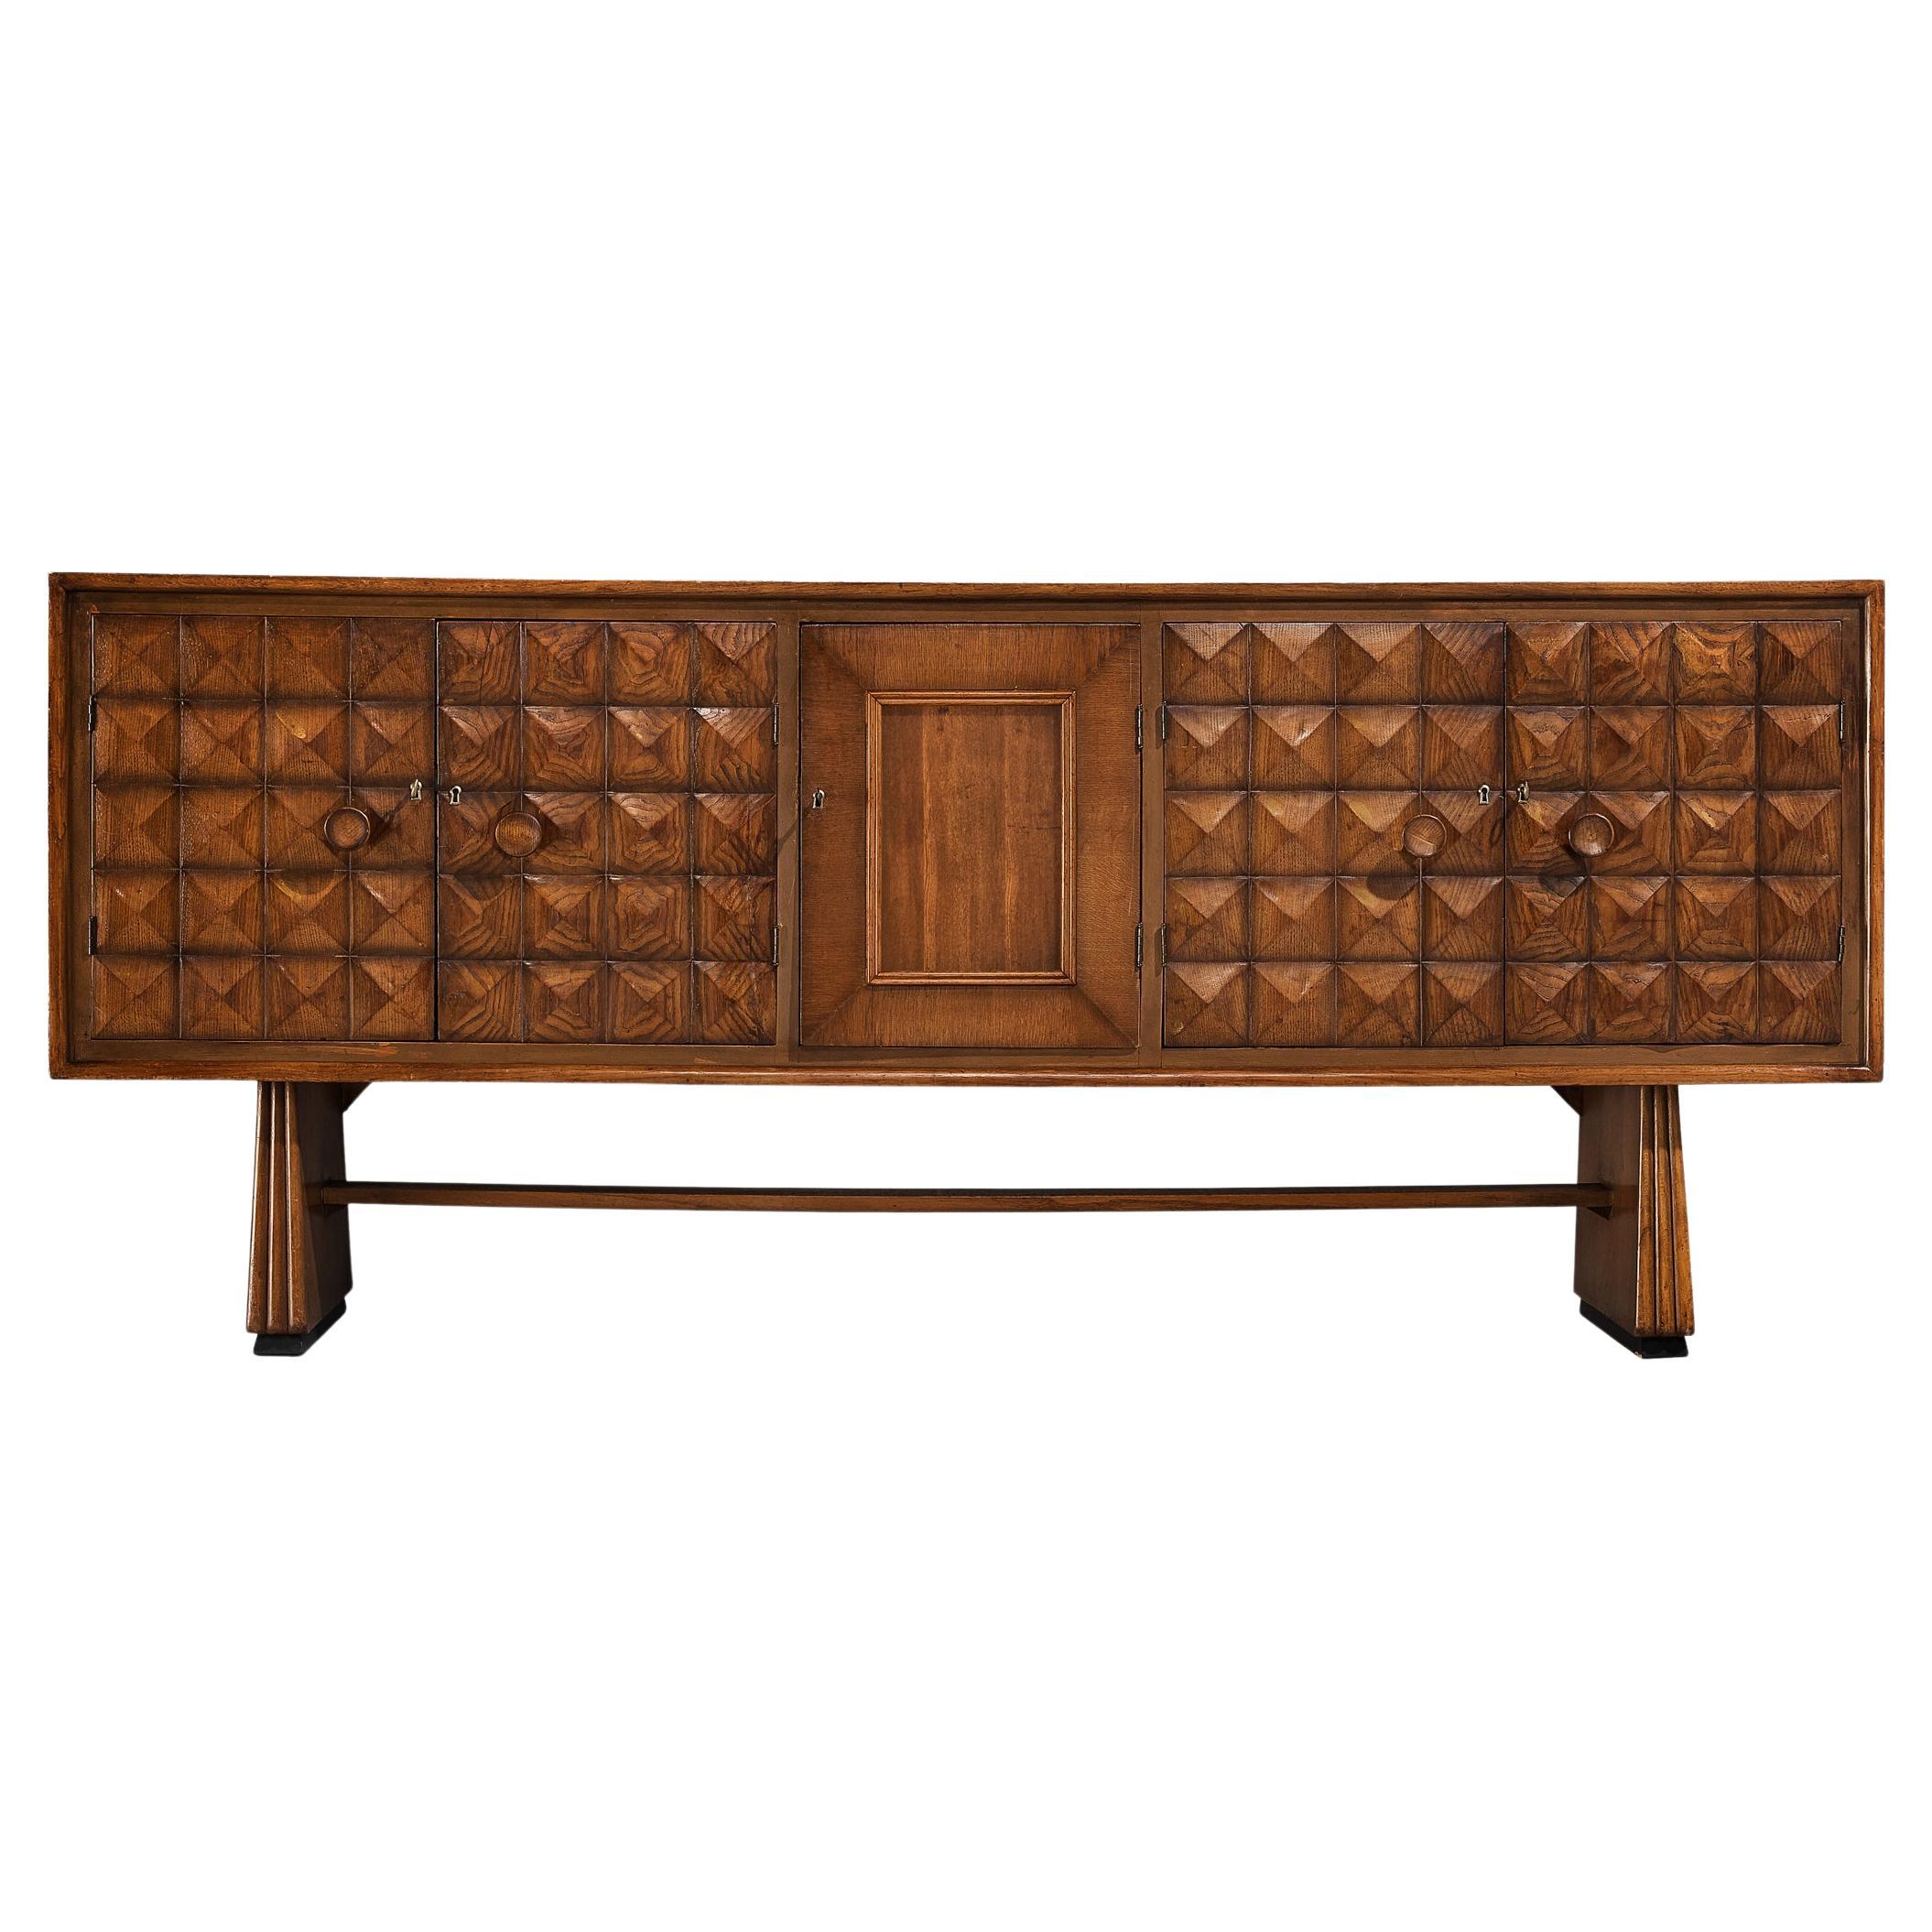 Italian Sideboard with Architectural and Decorative Elements